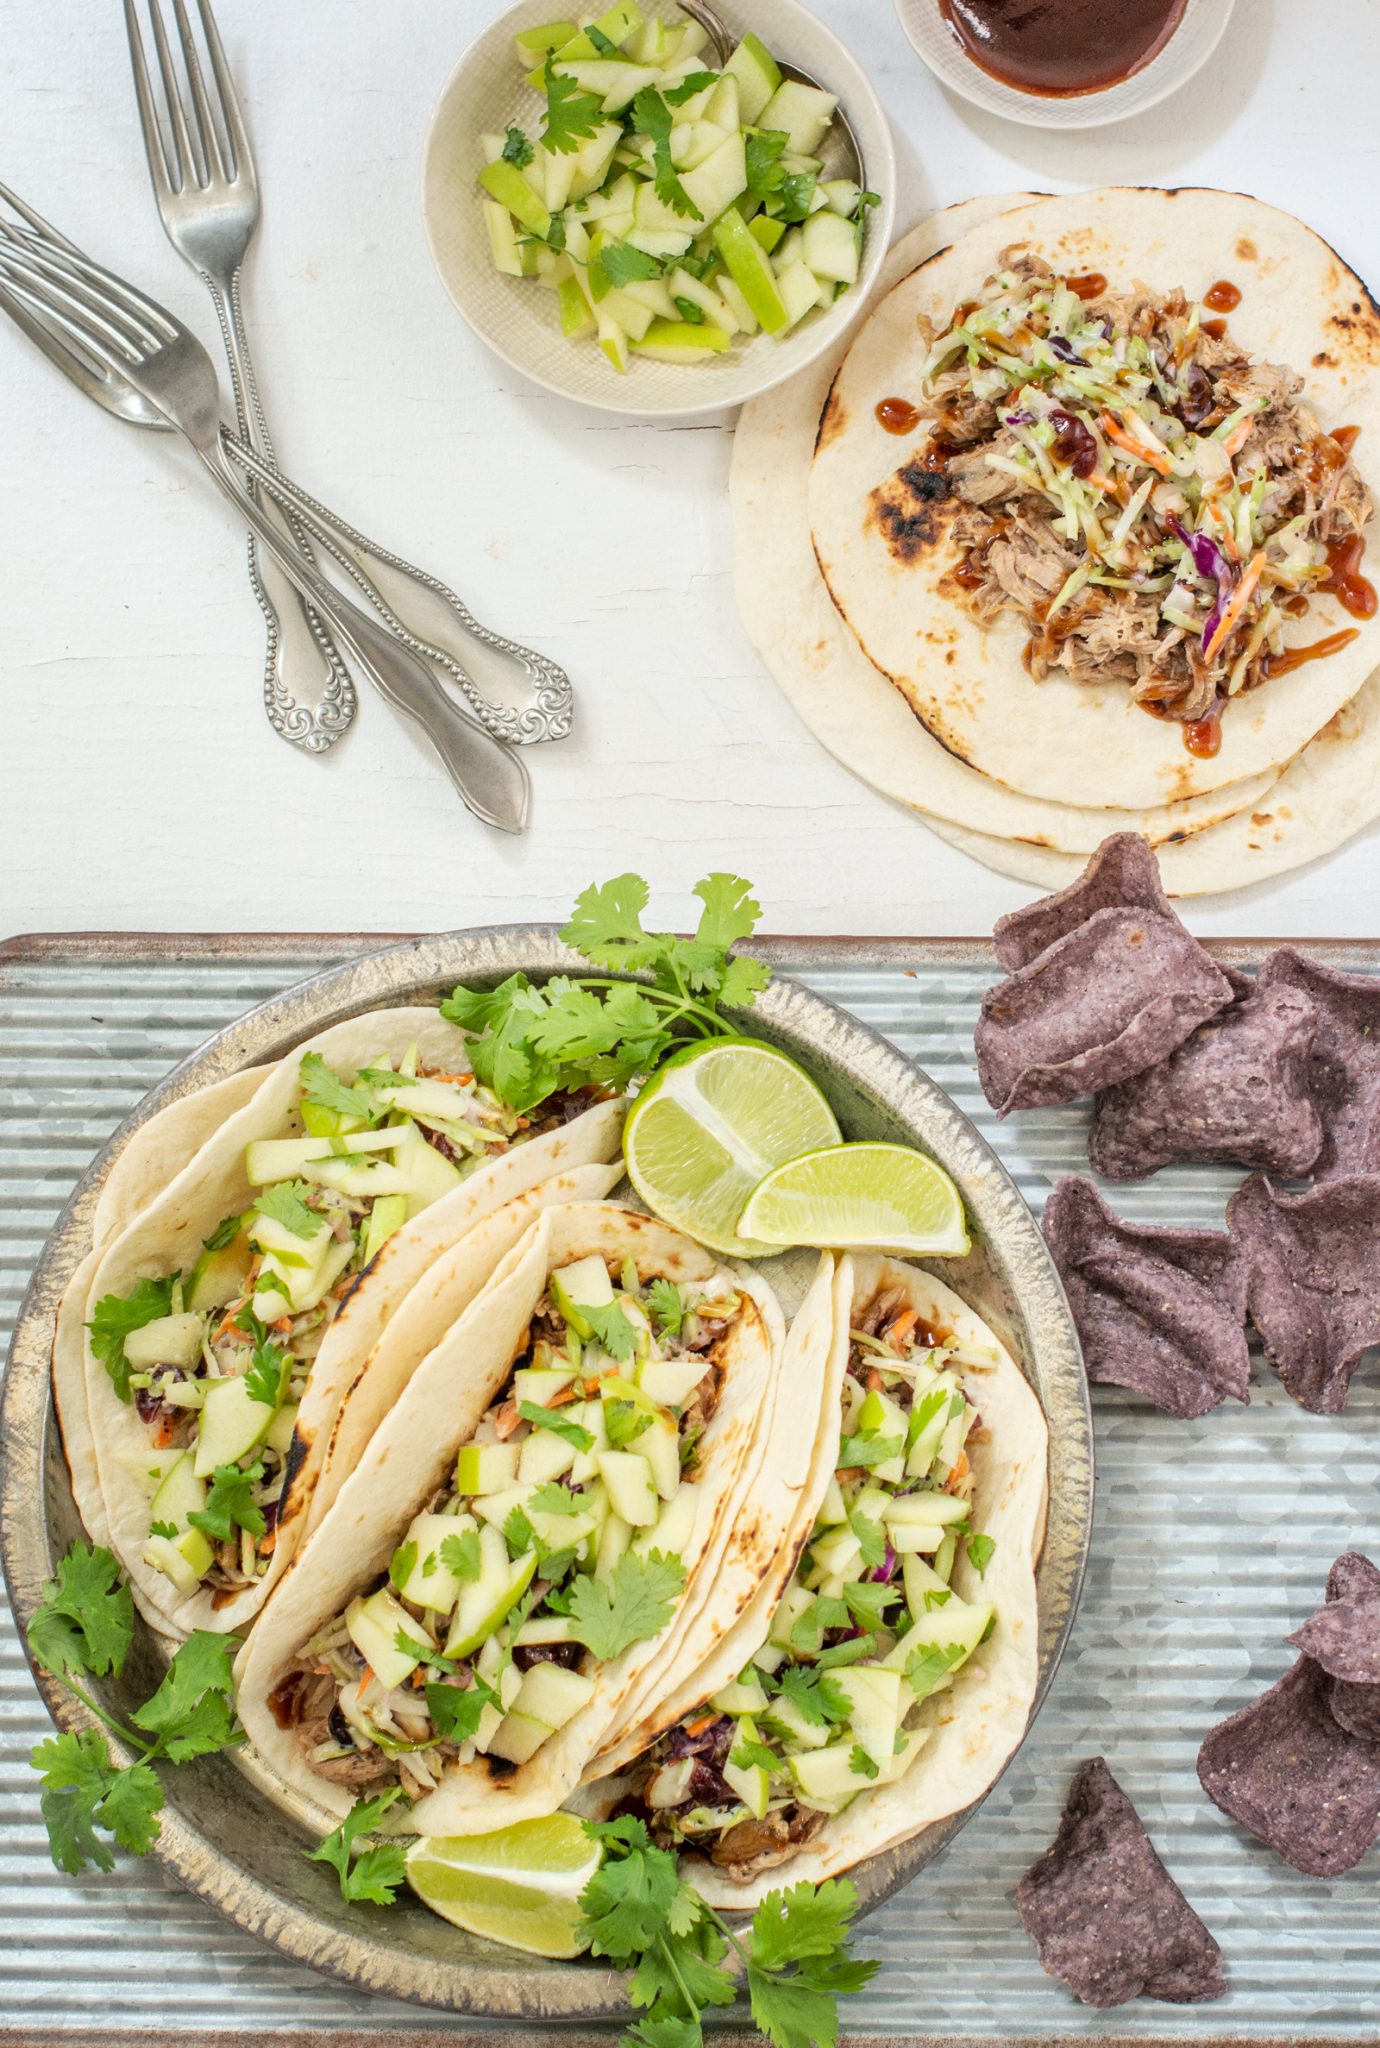 BBQ Pulled Pork Taco Recipe with Apple Salsa - Little Figgy Food